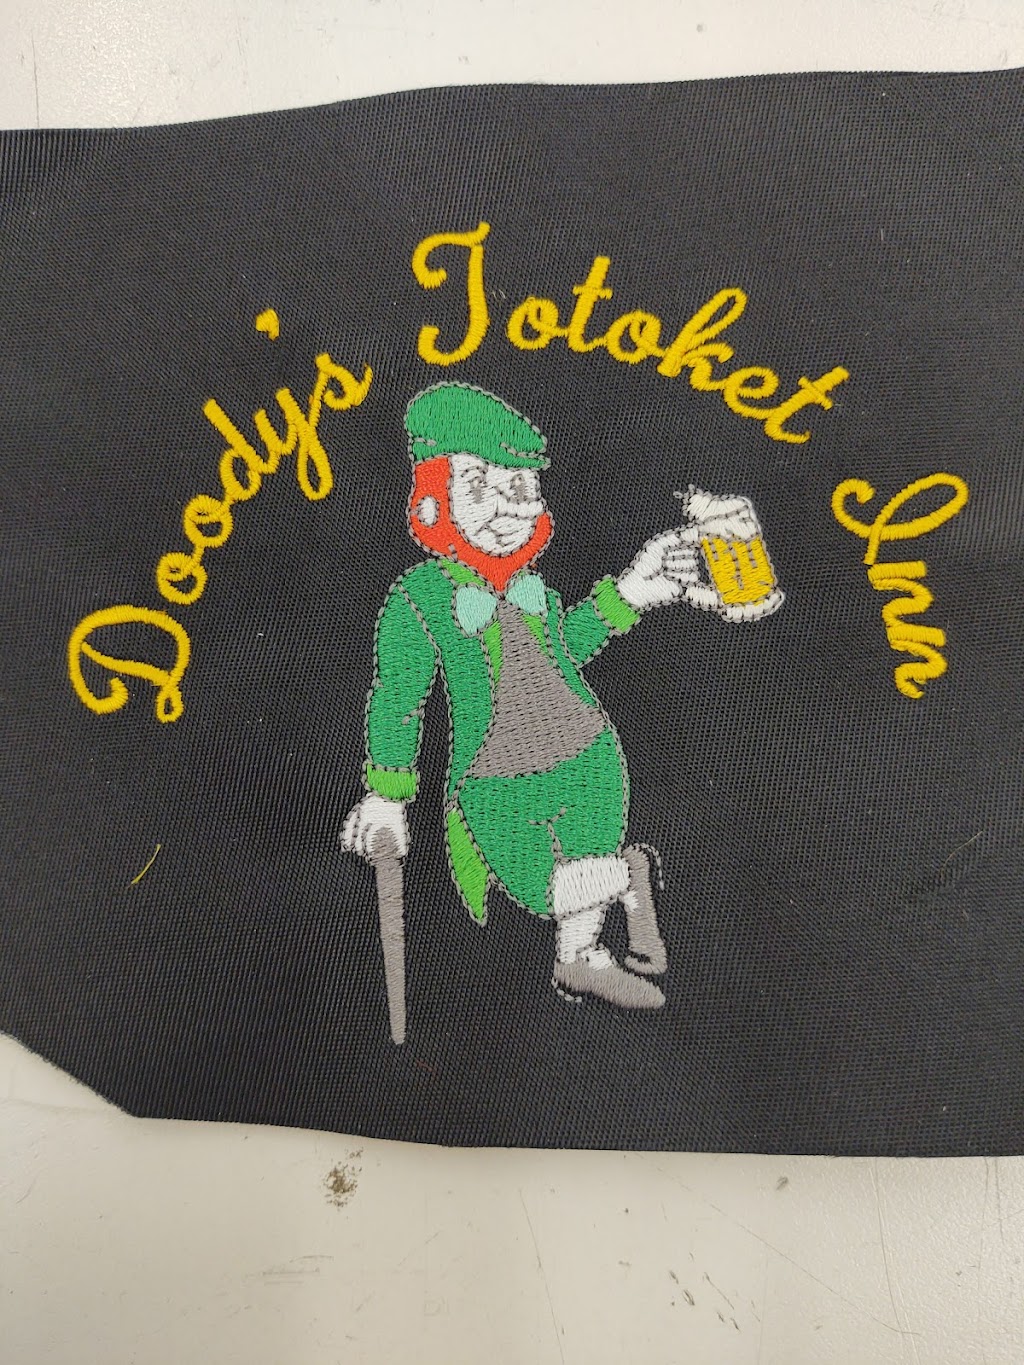 Lookers Embroidery | 15 Wheelbarrow Ln, East Haven, CT 06513 | Phone: (203) 468-7262